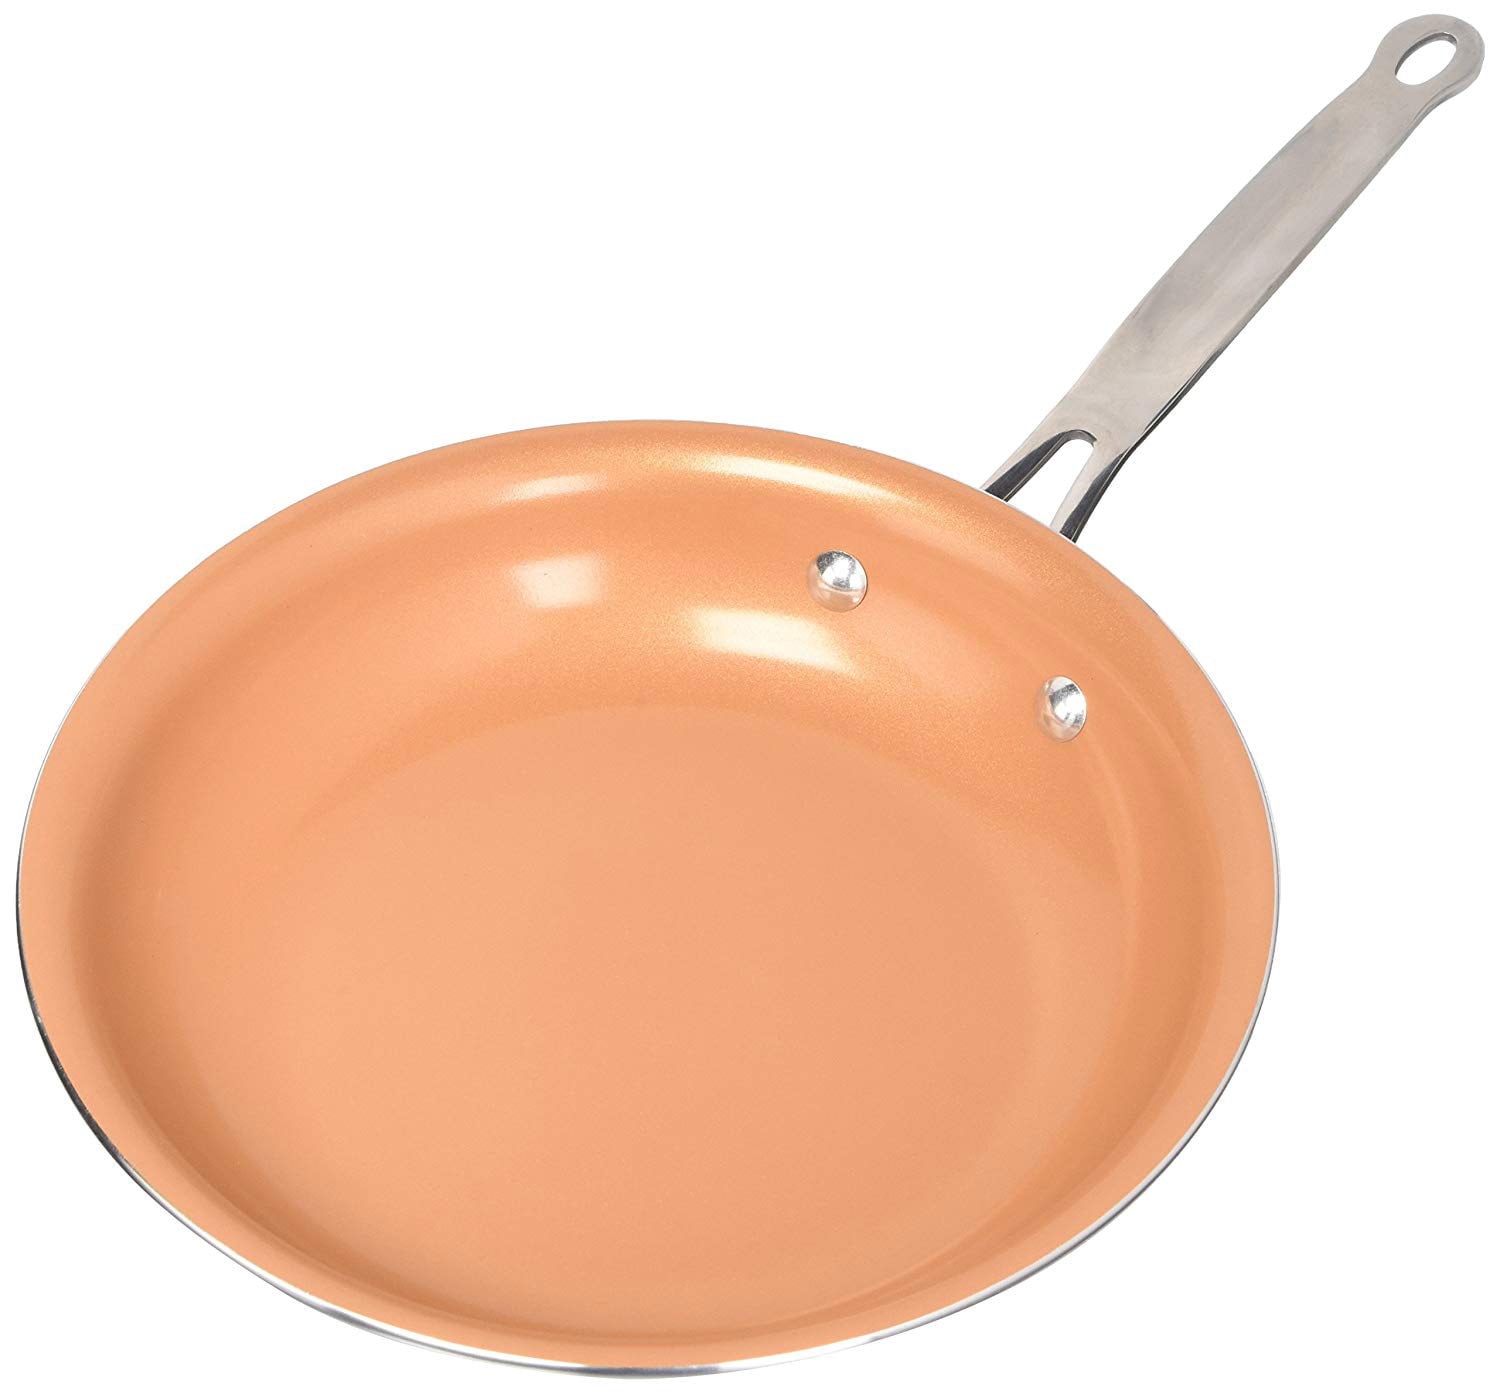 Red Copper Pan by BulbHead Ceramic Copper Infused Non-Stick Fry Pan Skillet Scratch Resistant Without PFOA and PTFE Heat Resistant From Stove To Oven Up To 500 Degrees 1, 12 